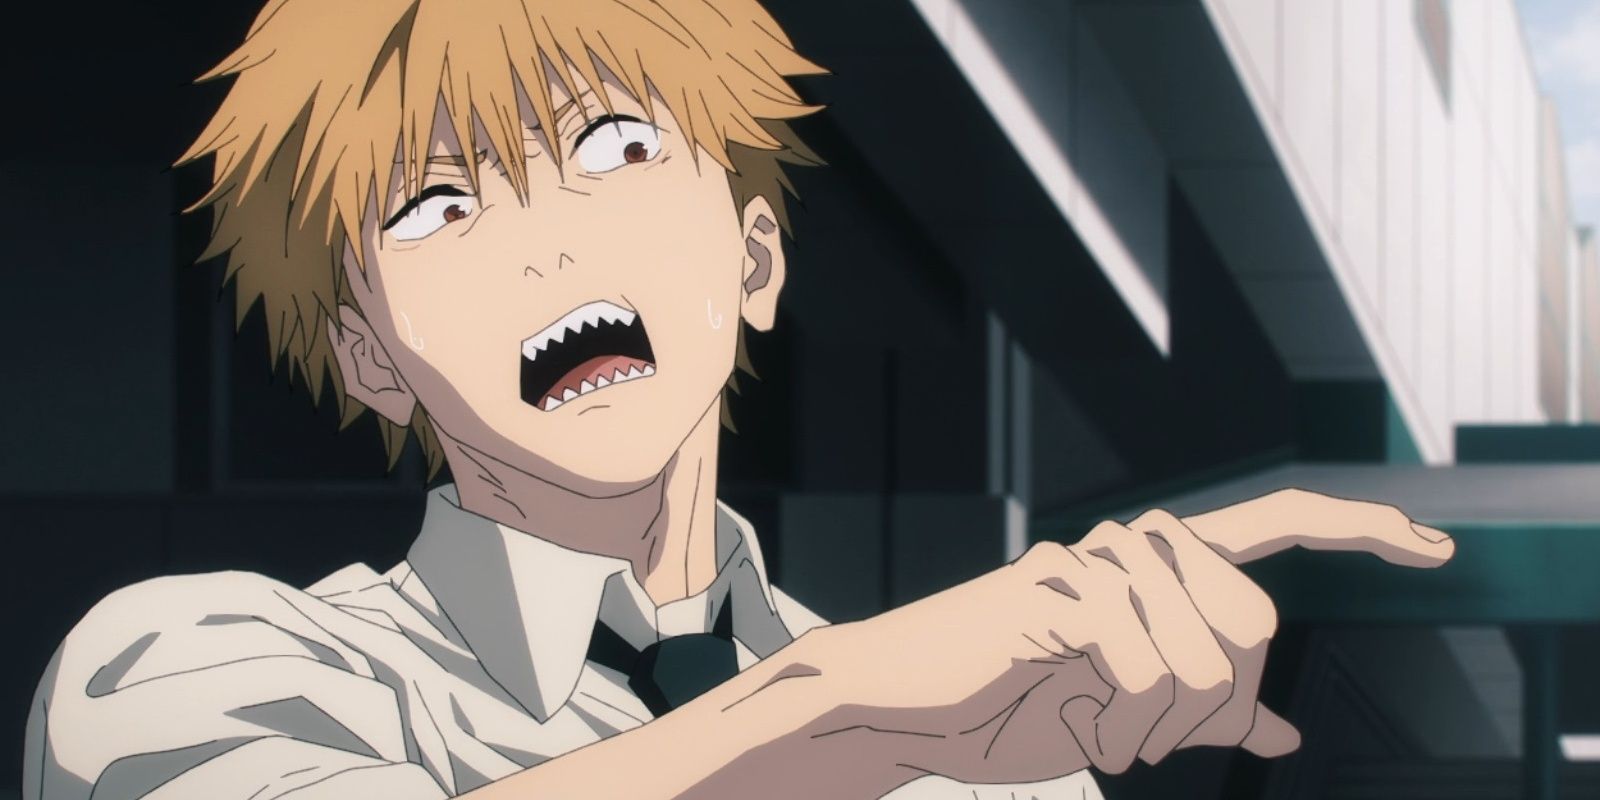 Denji is pointing an accusing finger in Chainsaw Man.